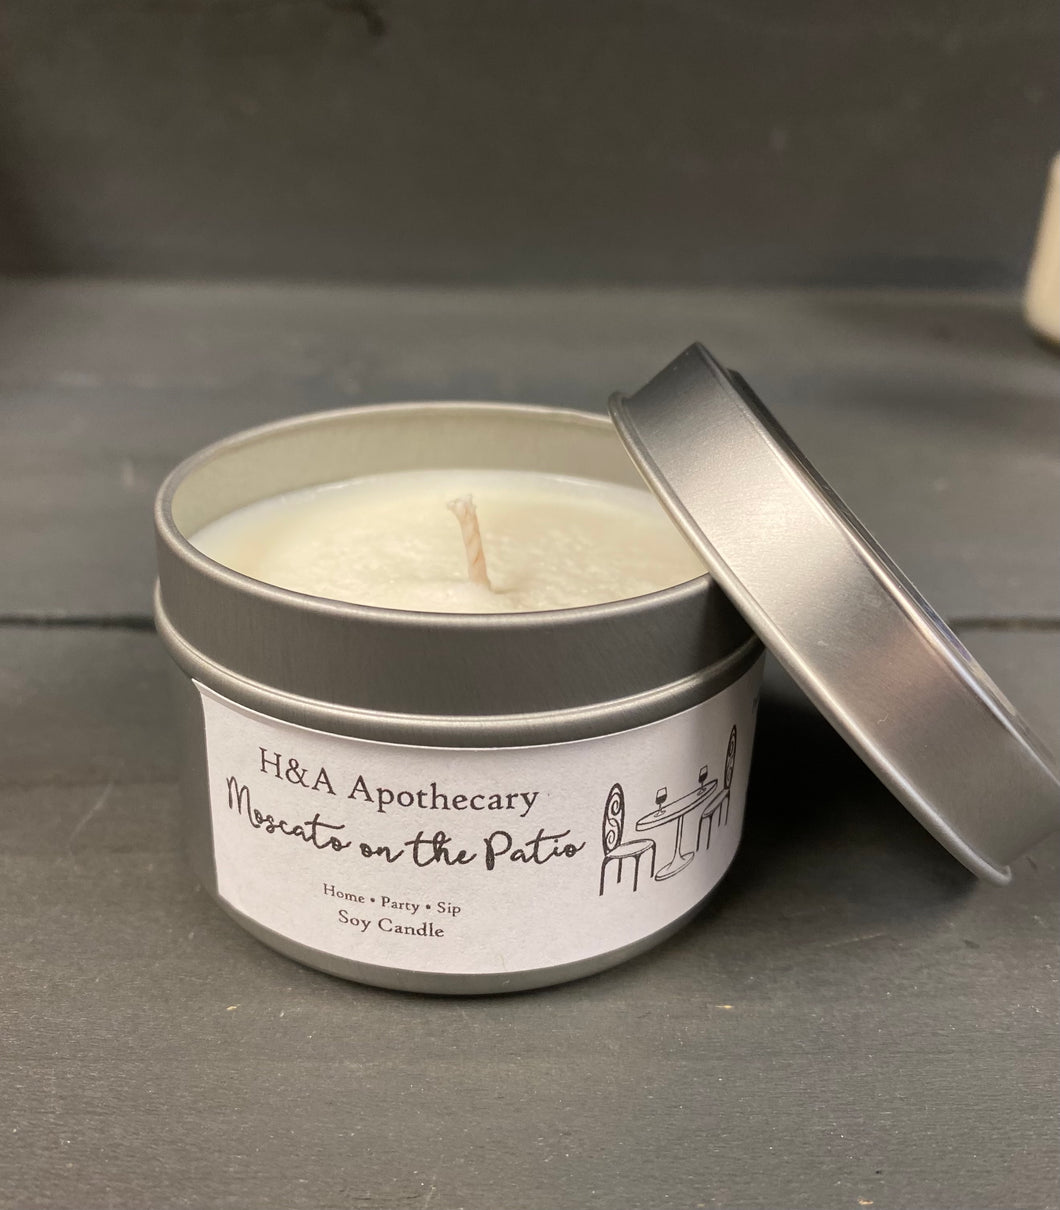 H&A Apothecary Moscato on the Patio Soy Candle